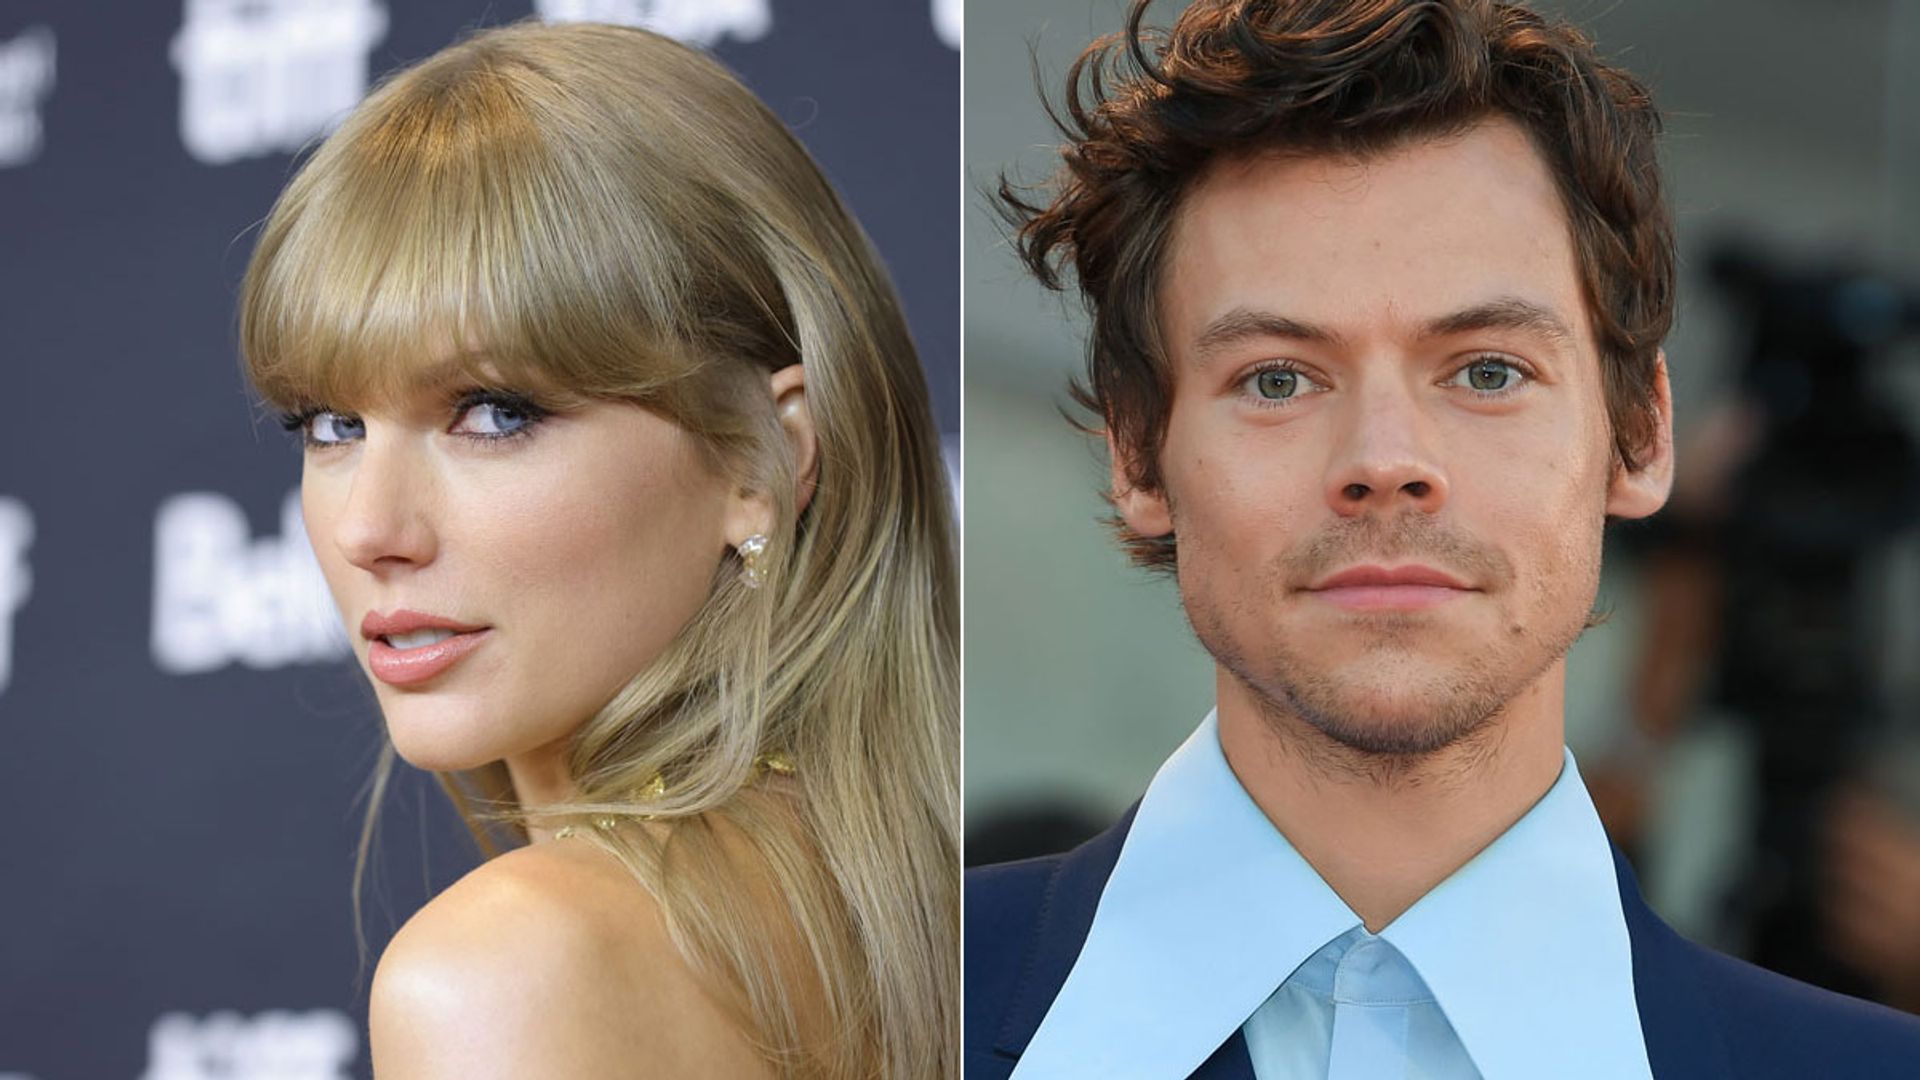 A split image of Taylor Swift and Harry Styles